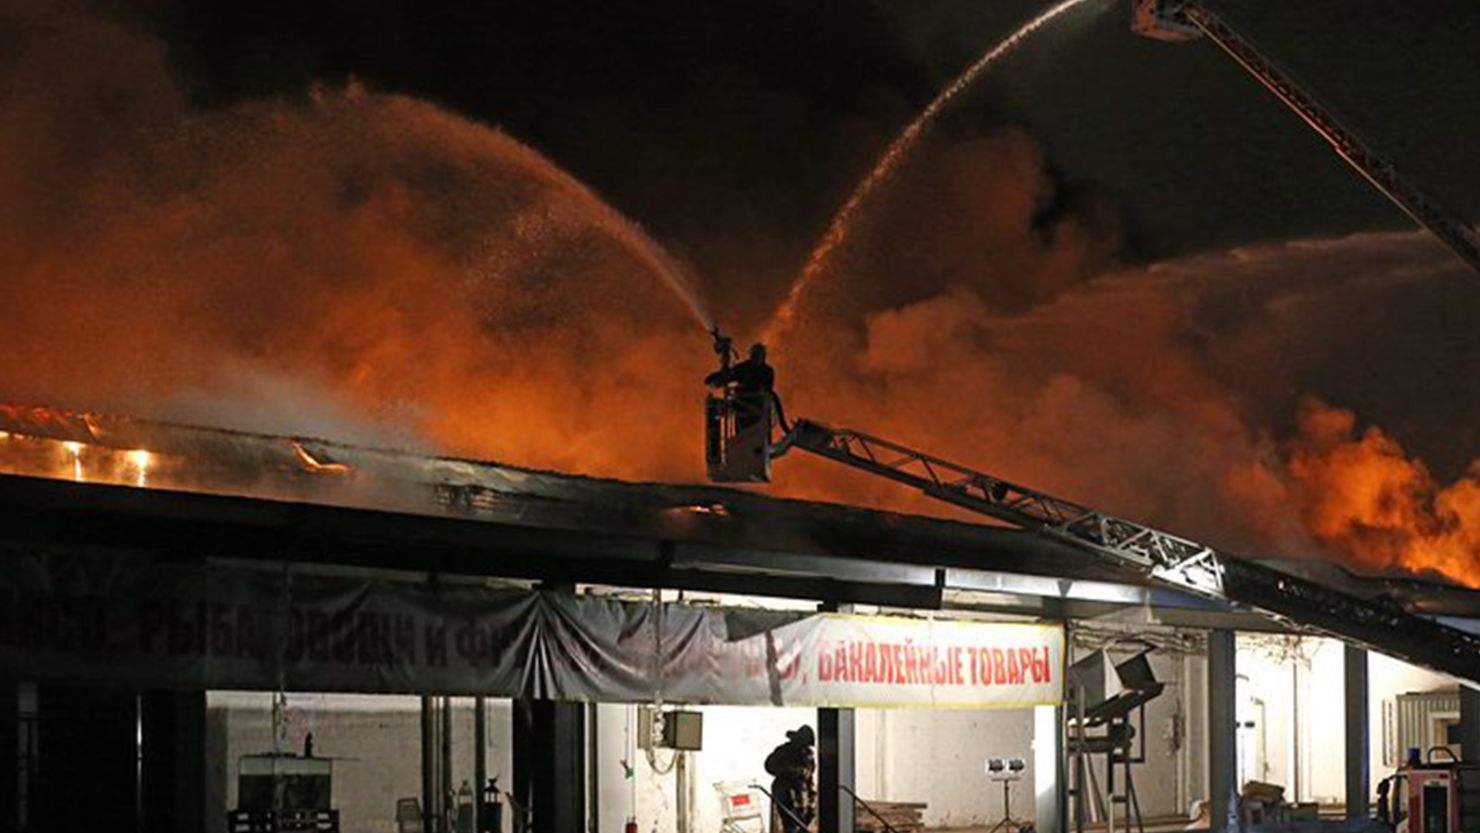 Eight firemen were killed when they attempted to put out a warehouse fire in Moscow Thursday evening, according to Russian state news, TASS.